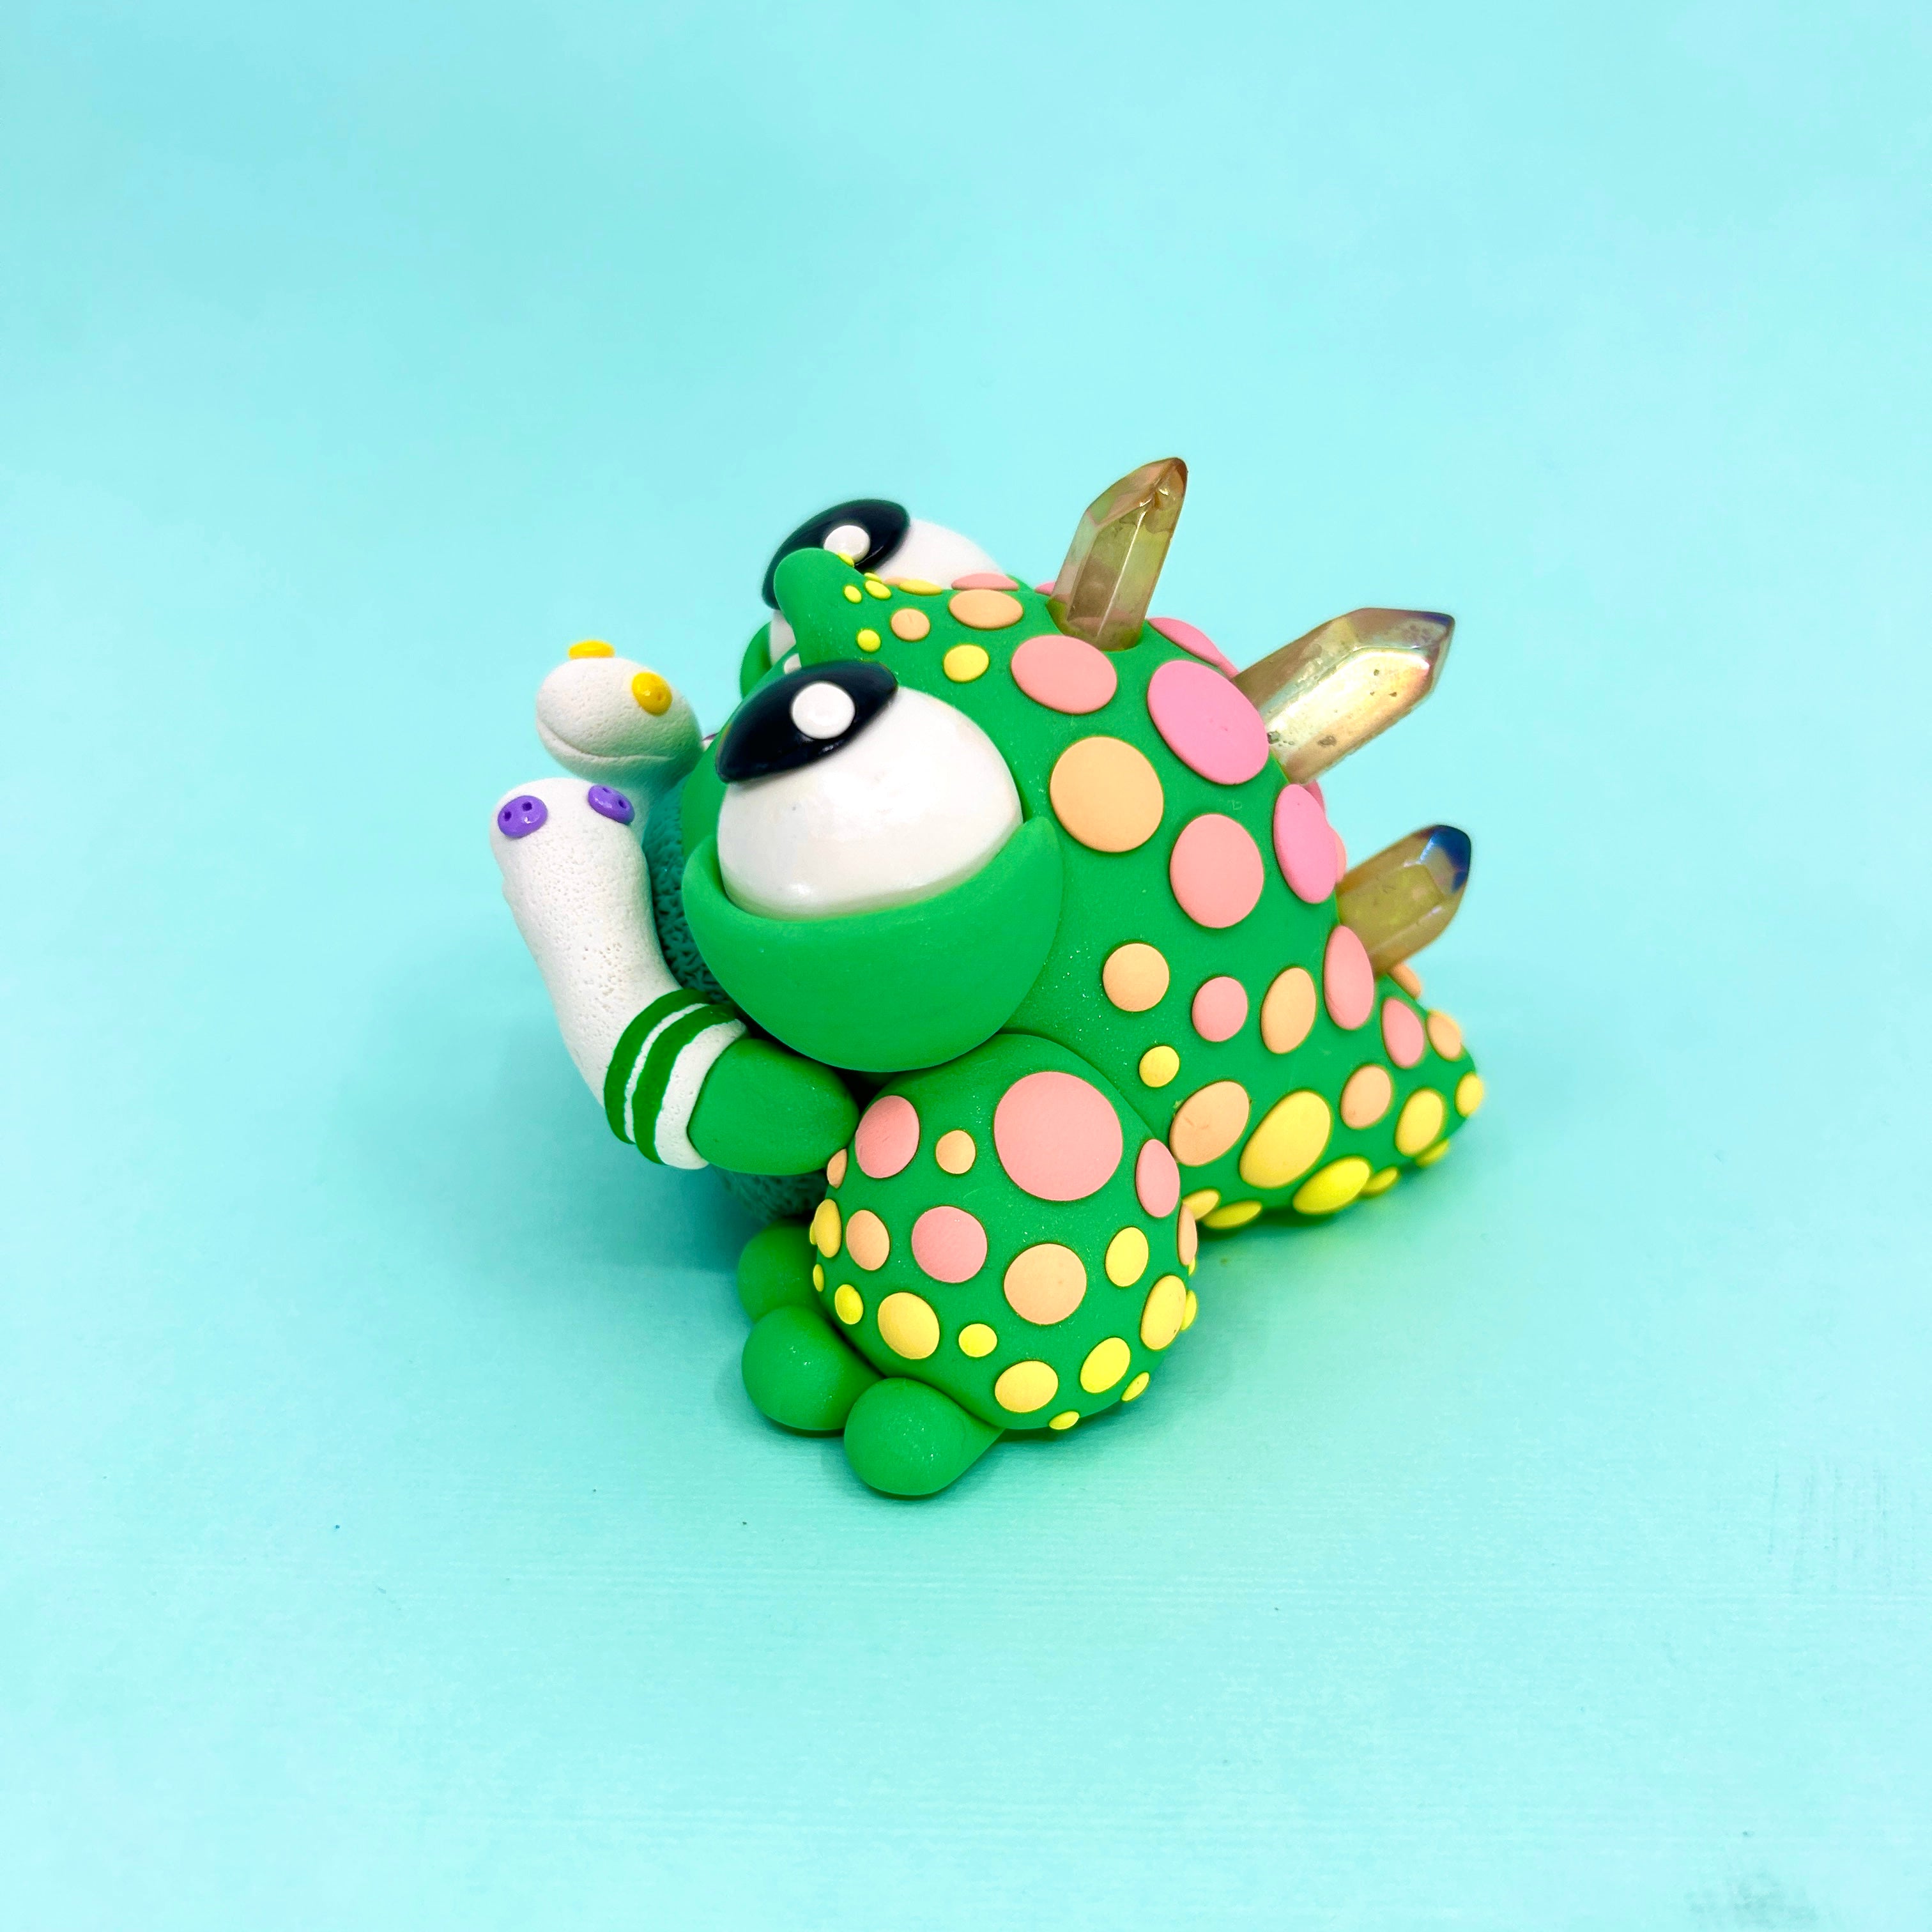 A small dinosaur toy with colorful crystals and dots, part of Simon Says Macy & Friends - Clementine and Her Only Friends collection.